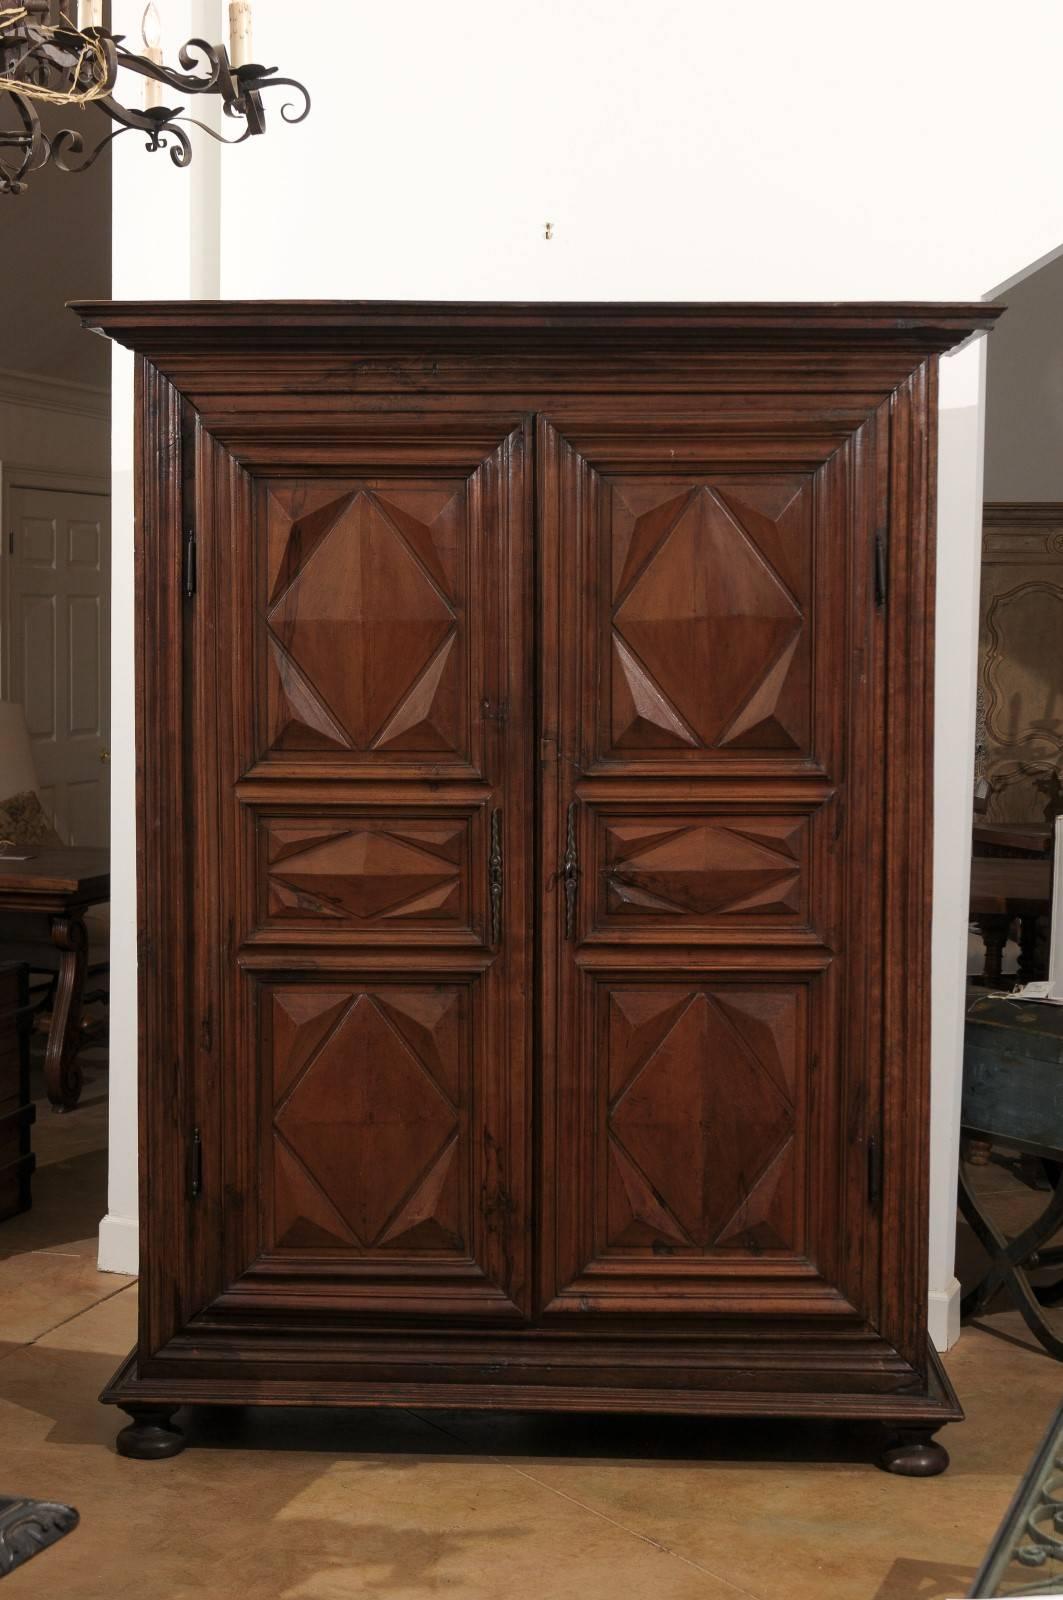 A mid 17th century French Louis XIII period walnut armoire with diamond-shaped motifs and bun feet. This French carved wood armoire features a large molded cornice, sitting above two beautifully carved doors adorned with diamond-cut motifs (pointes